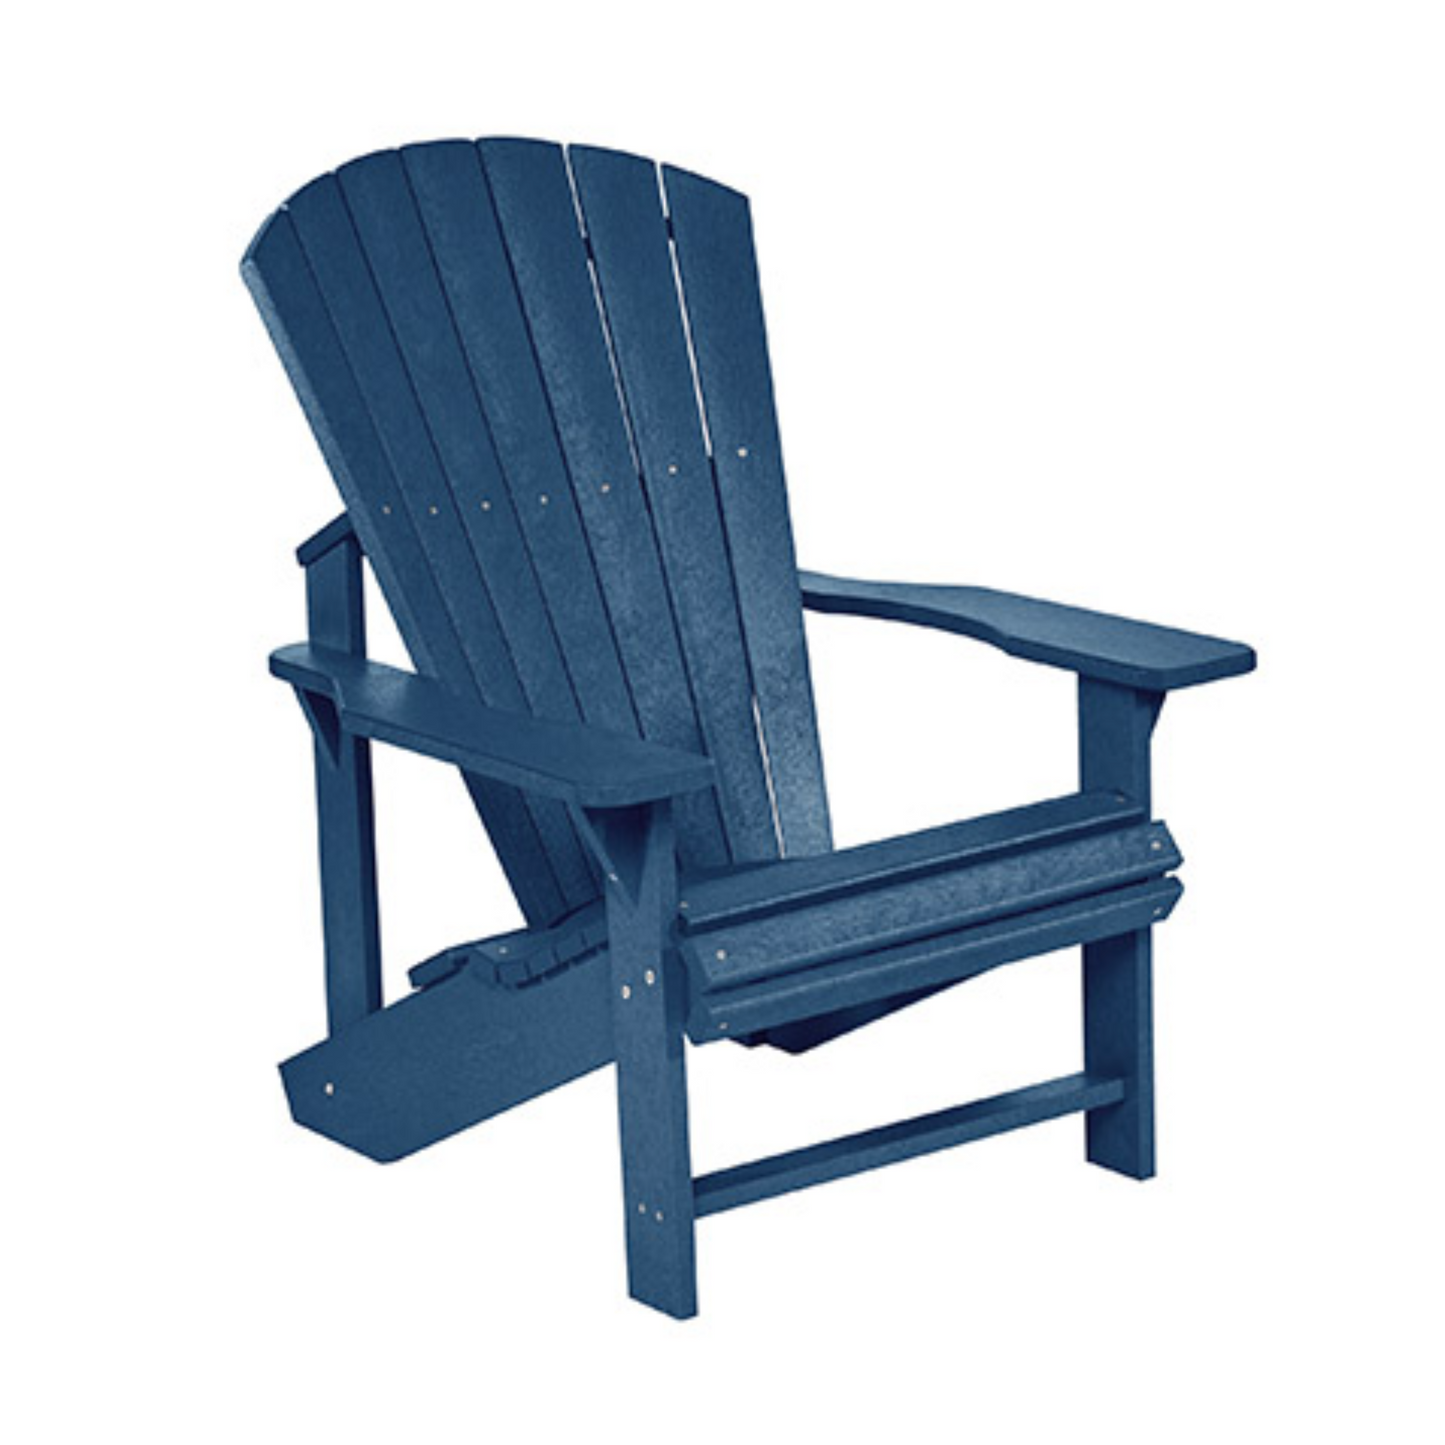 C.R.P. Upright Adirondack Chair In Navy